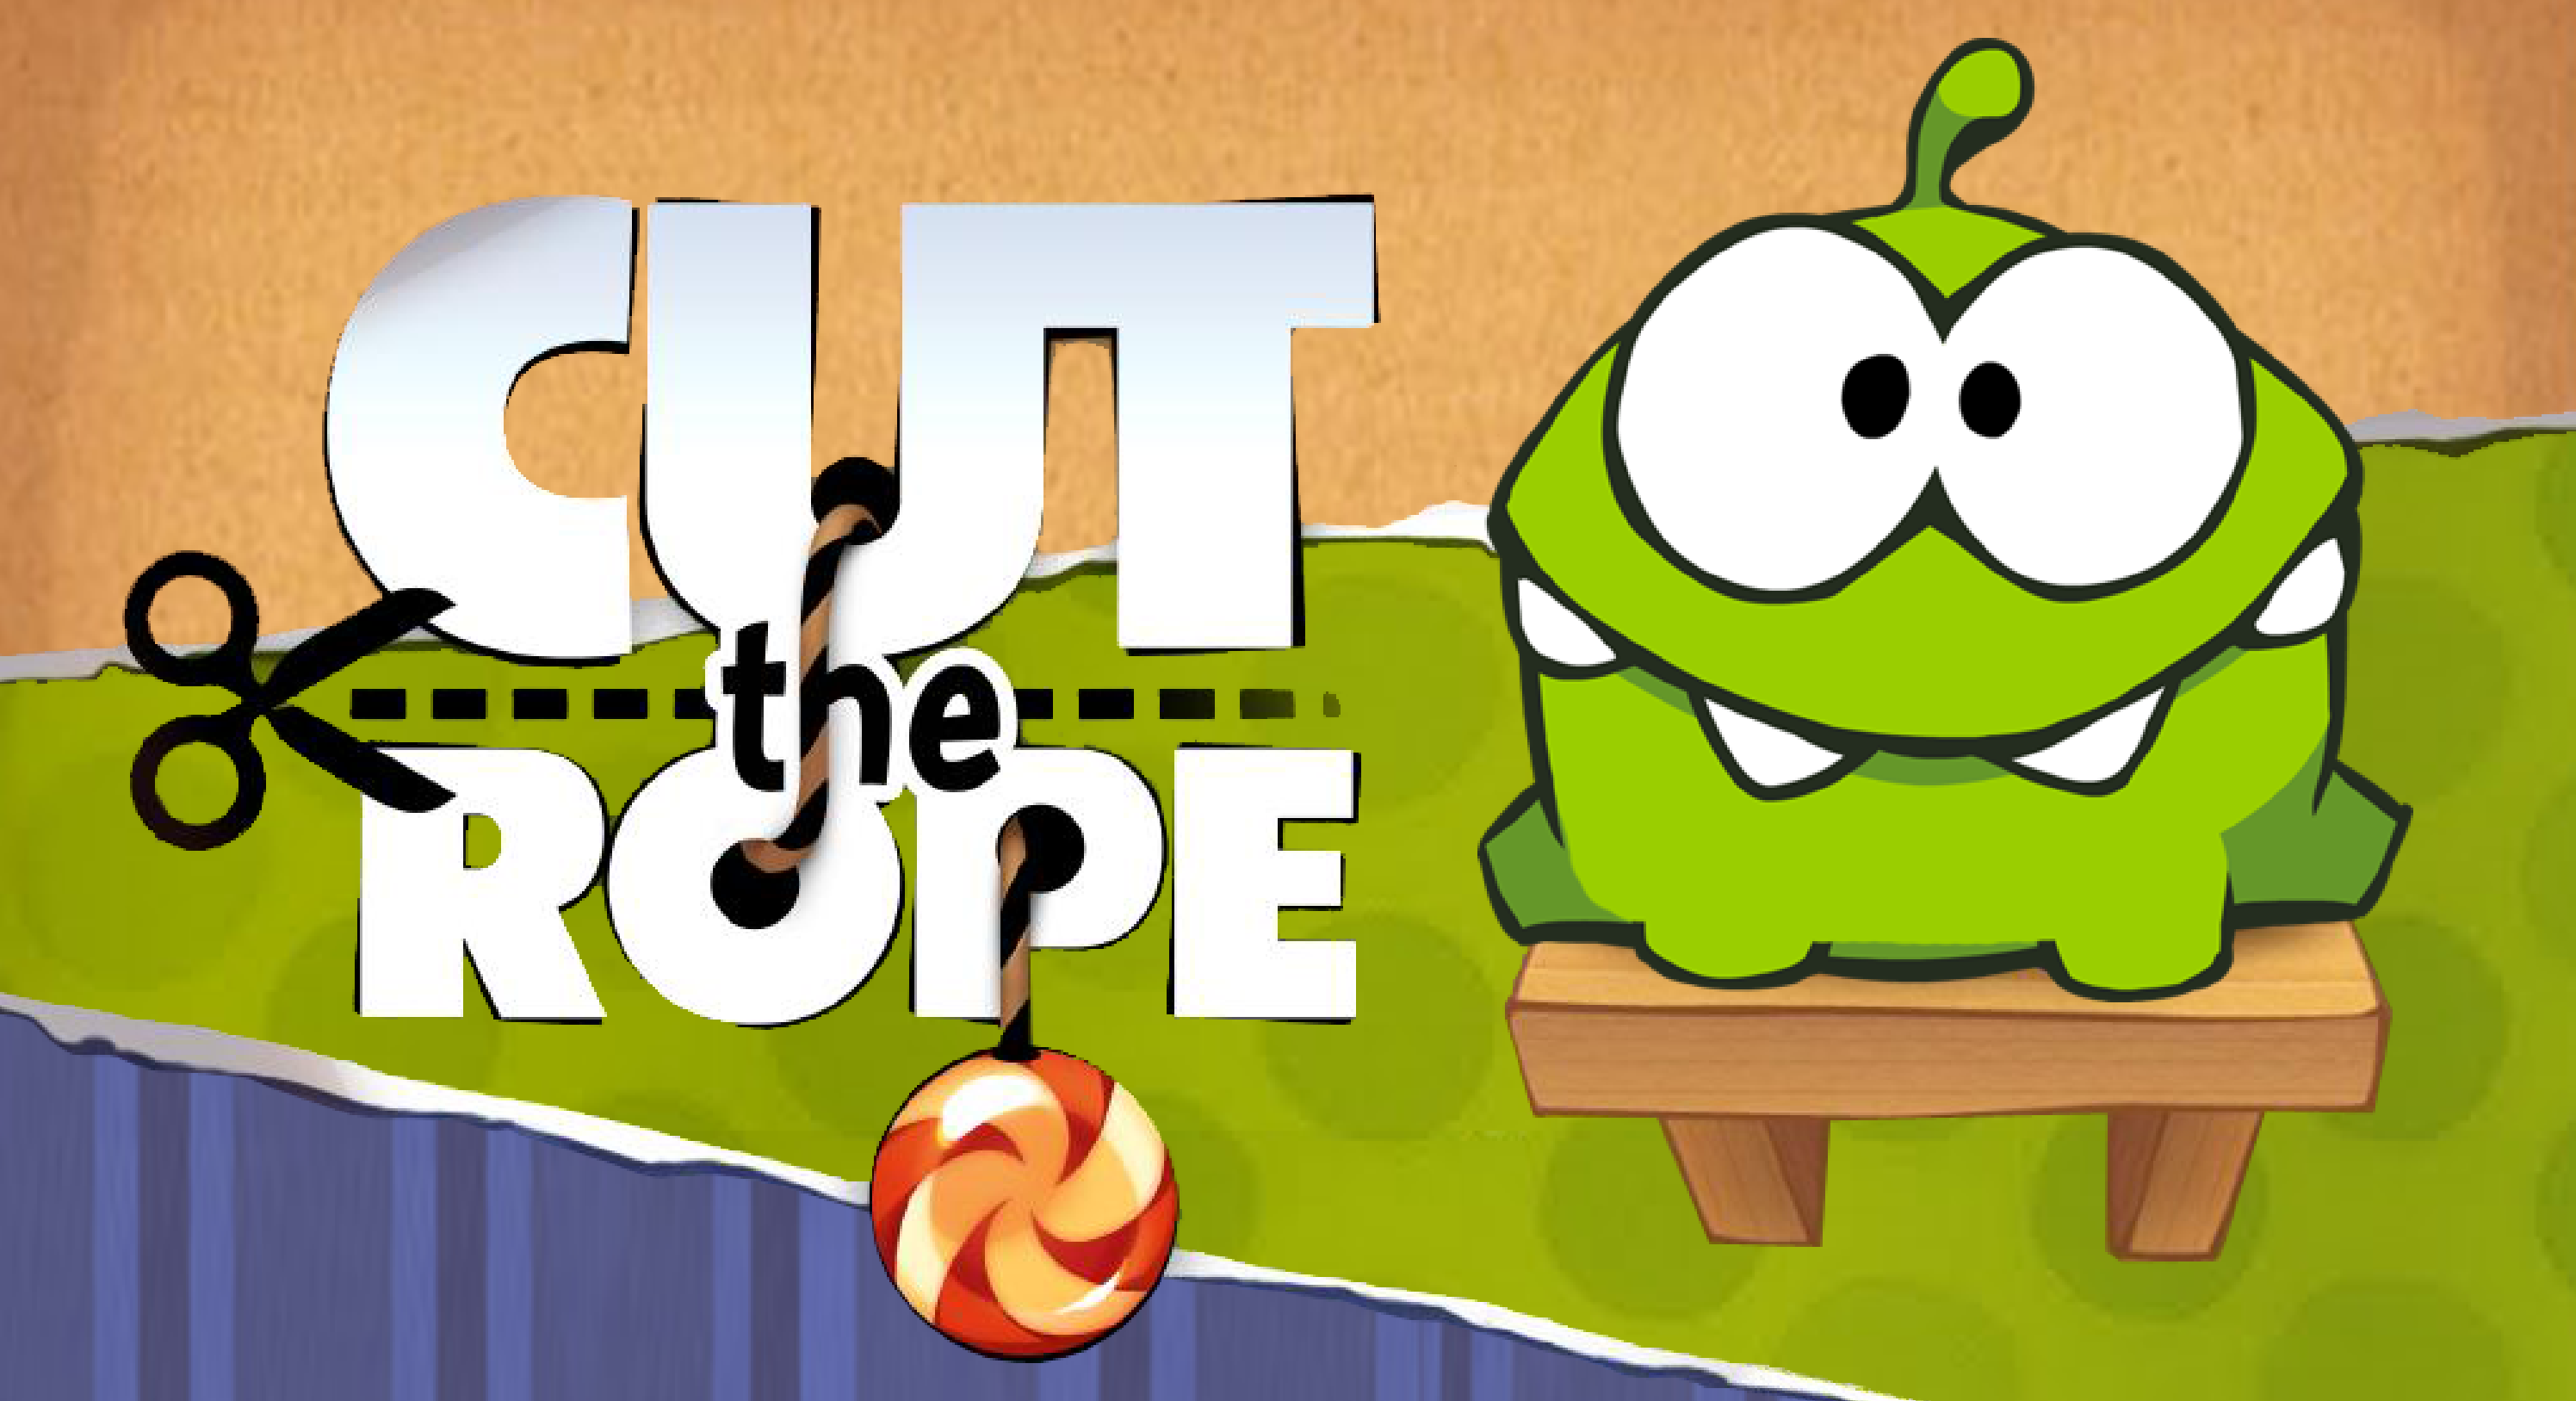 Cut The Rope Game Rating For Kids - Parent Rating For Cut The Rope